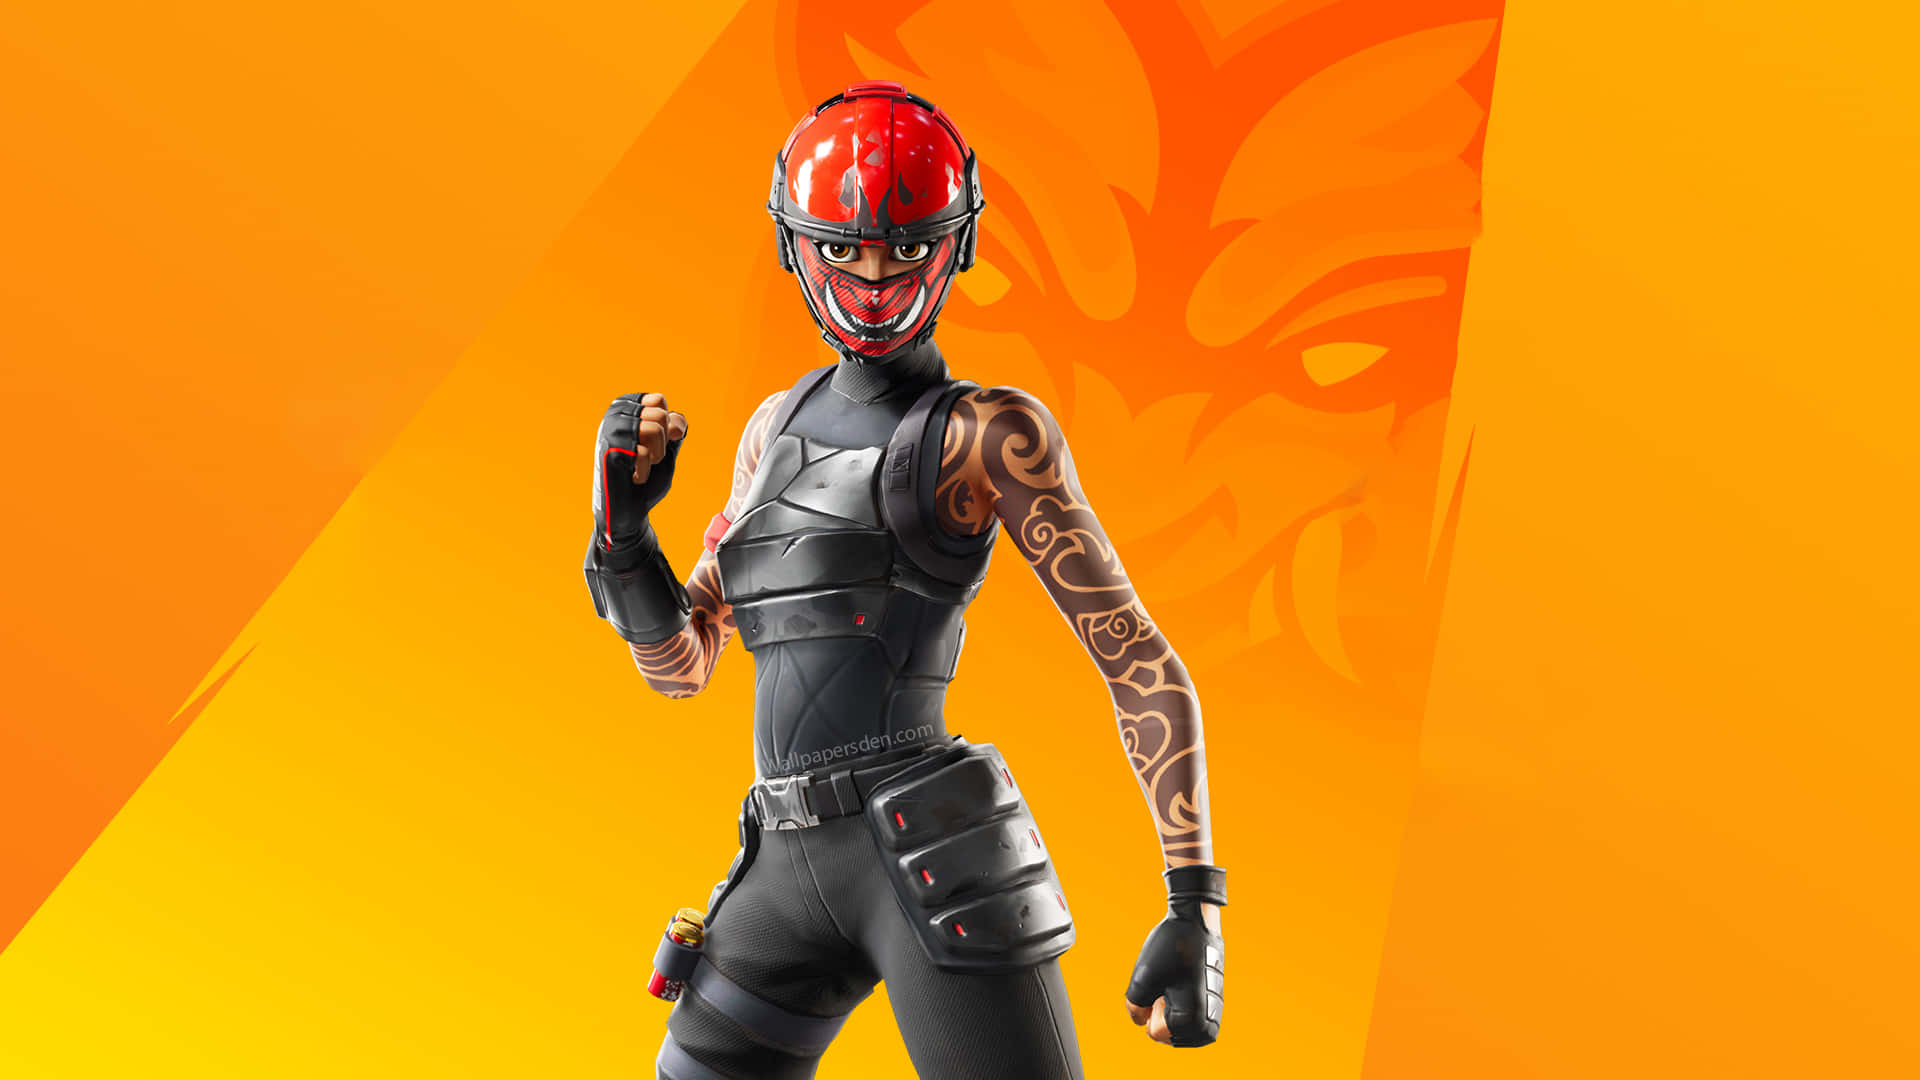 Climb The Leaderboard Ranks With The Stylish Manic Skin In Fortnite. Wallpaper